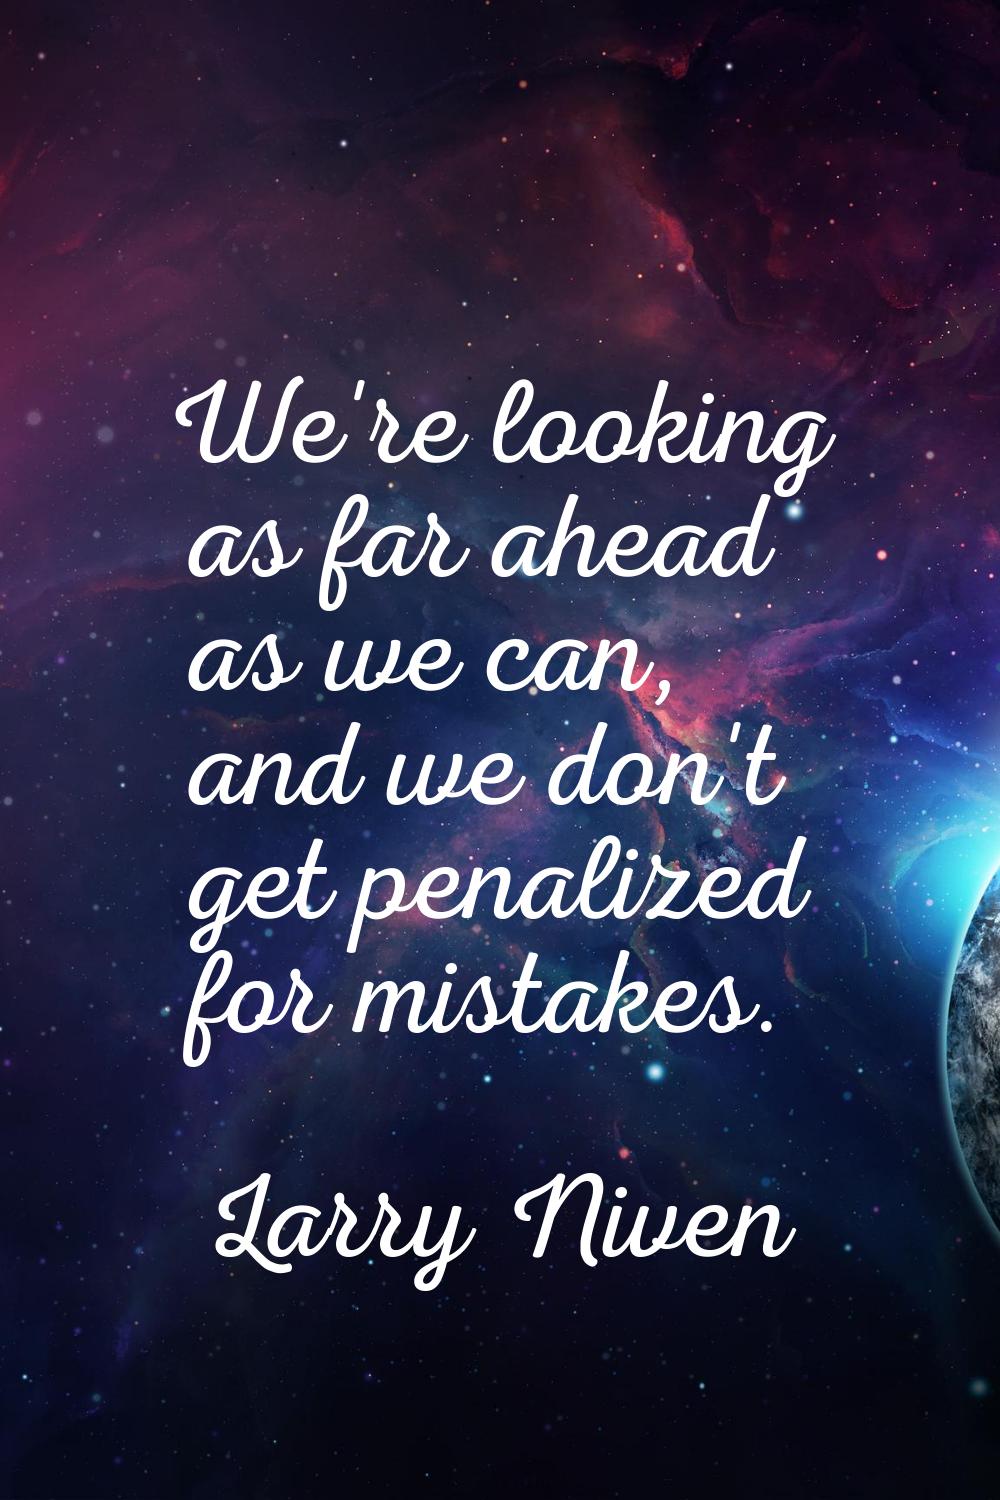 We're looking as far ahead as we can, and we don't get penalized for mistakes.